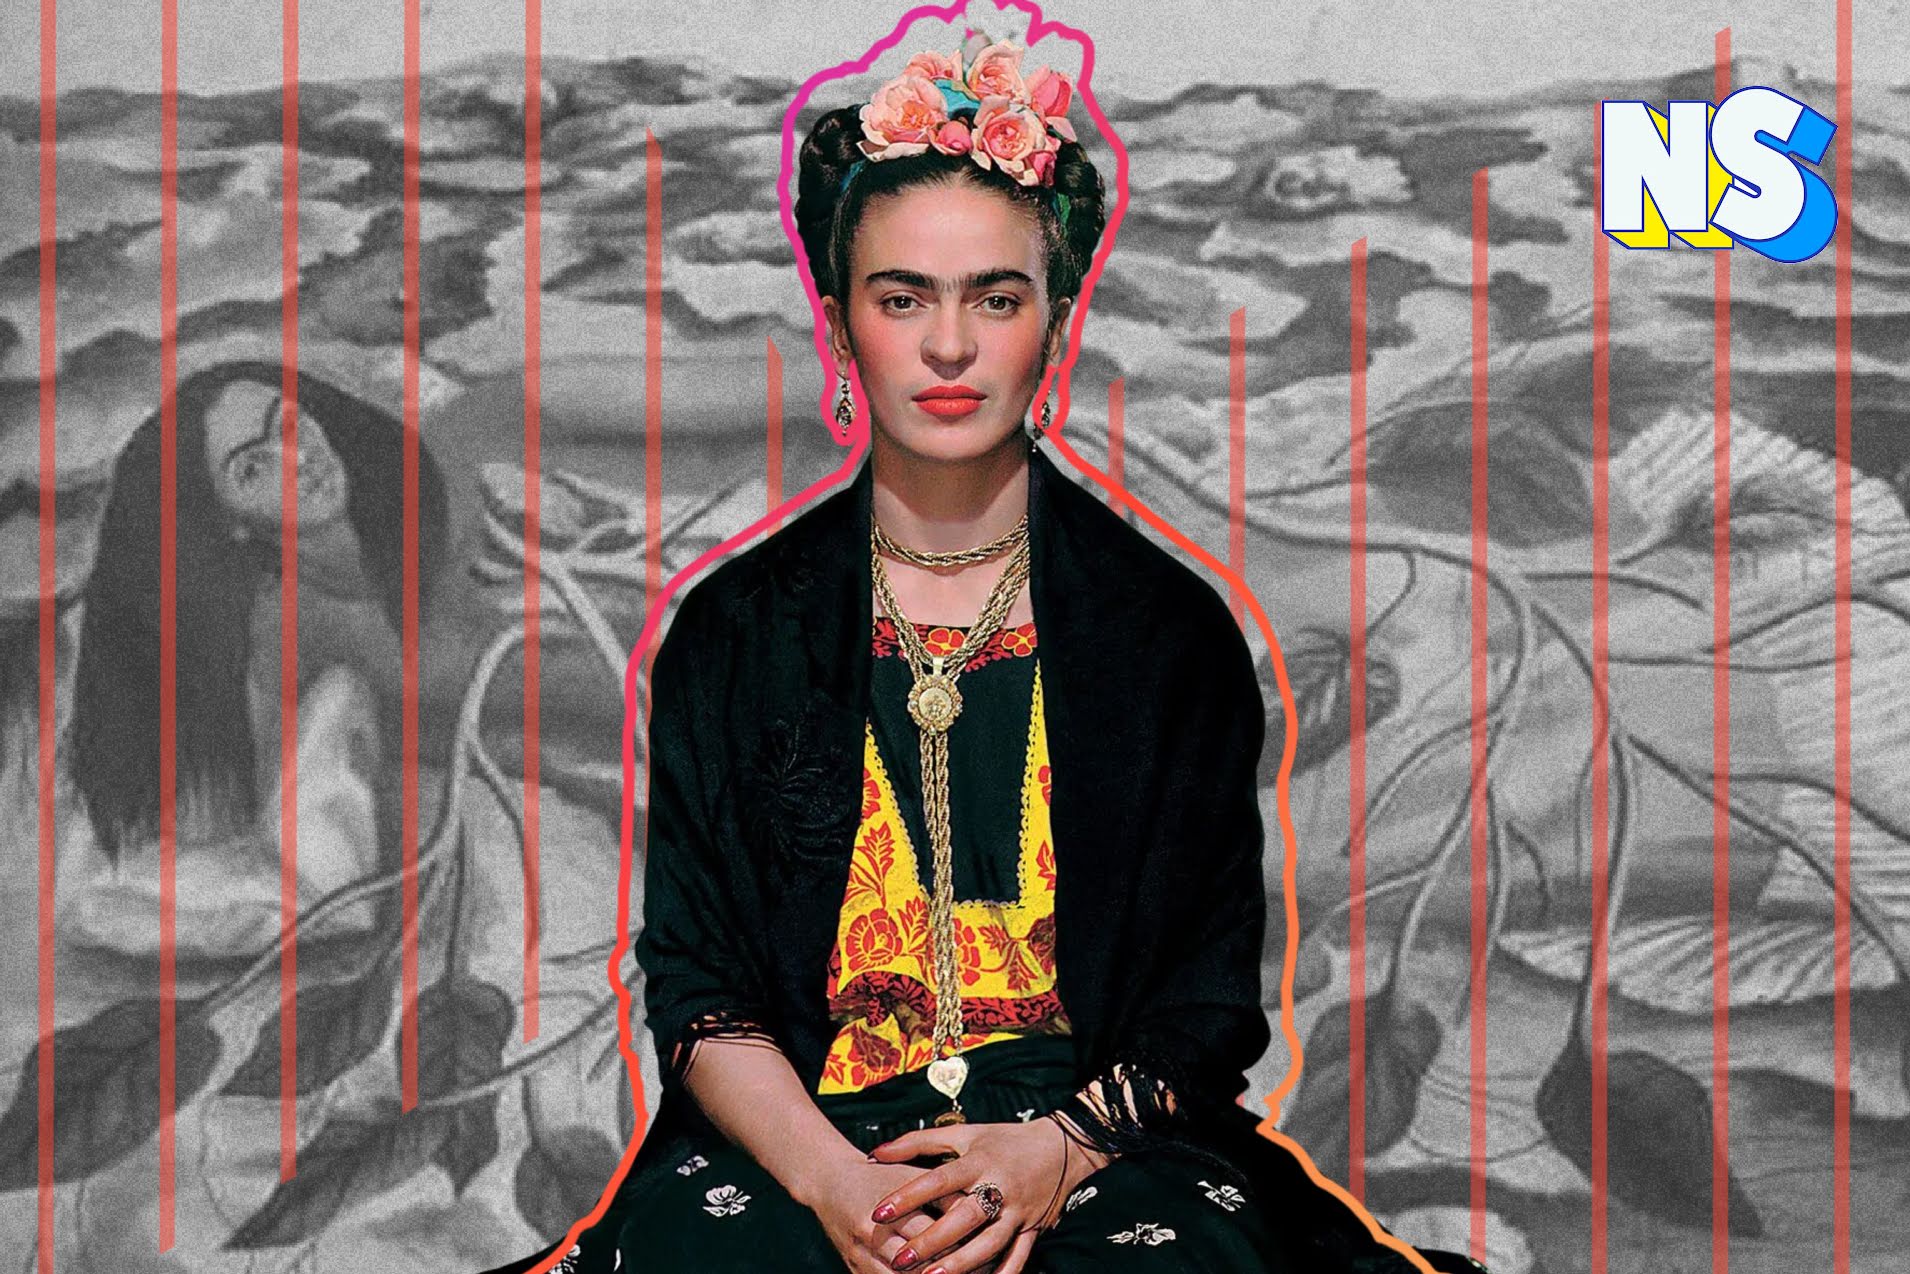 Raíces by Frida Kahlo is a Testament of the Value of Mexican Art and Latina Artists nuestro stories